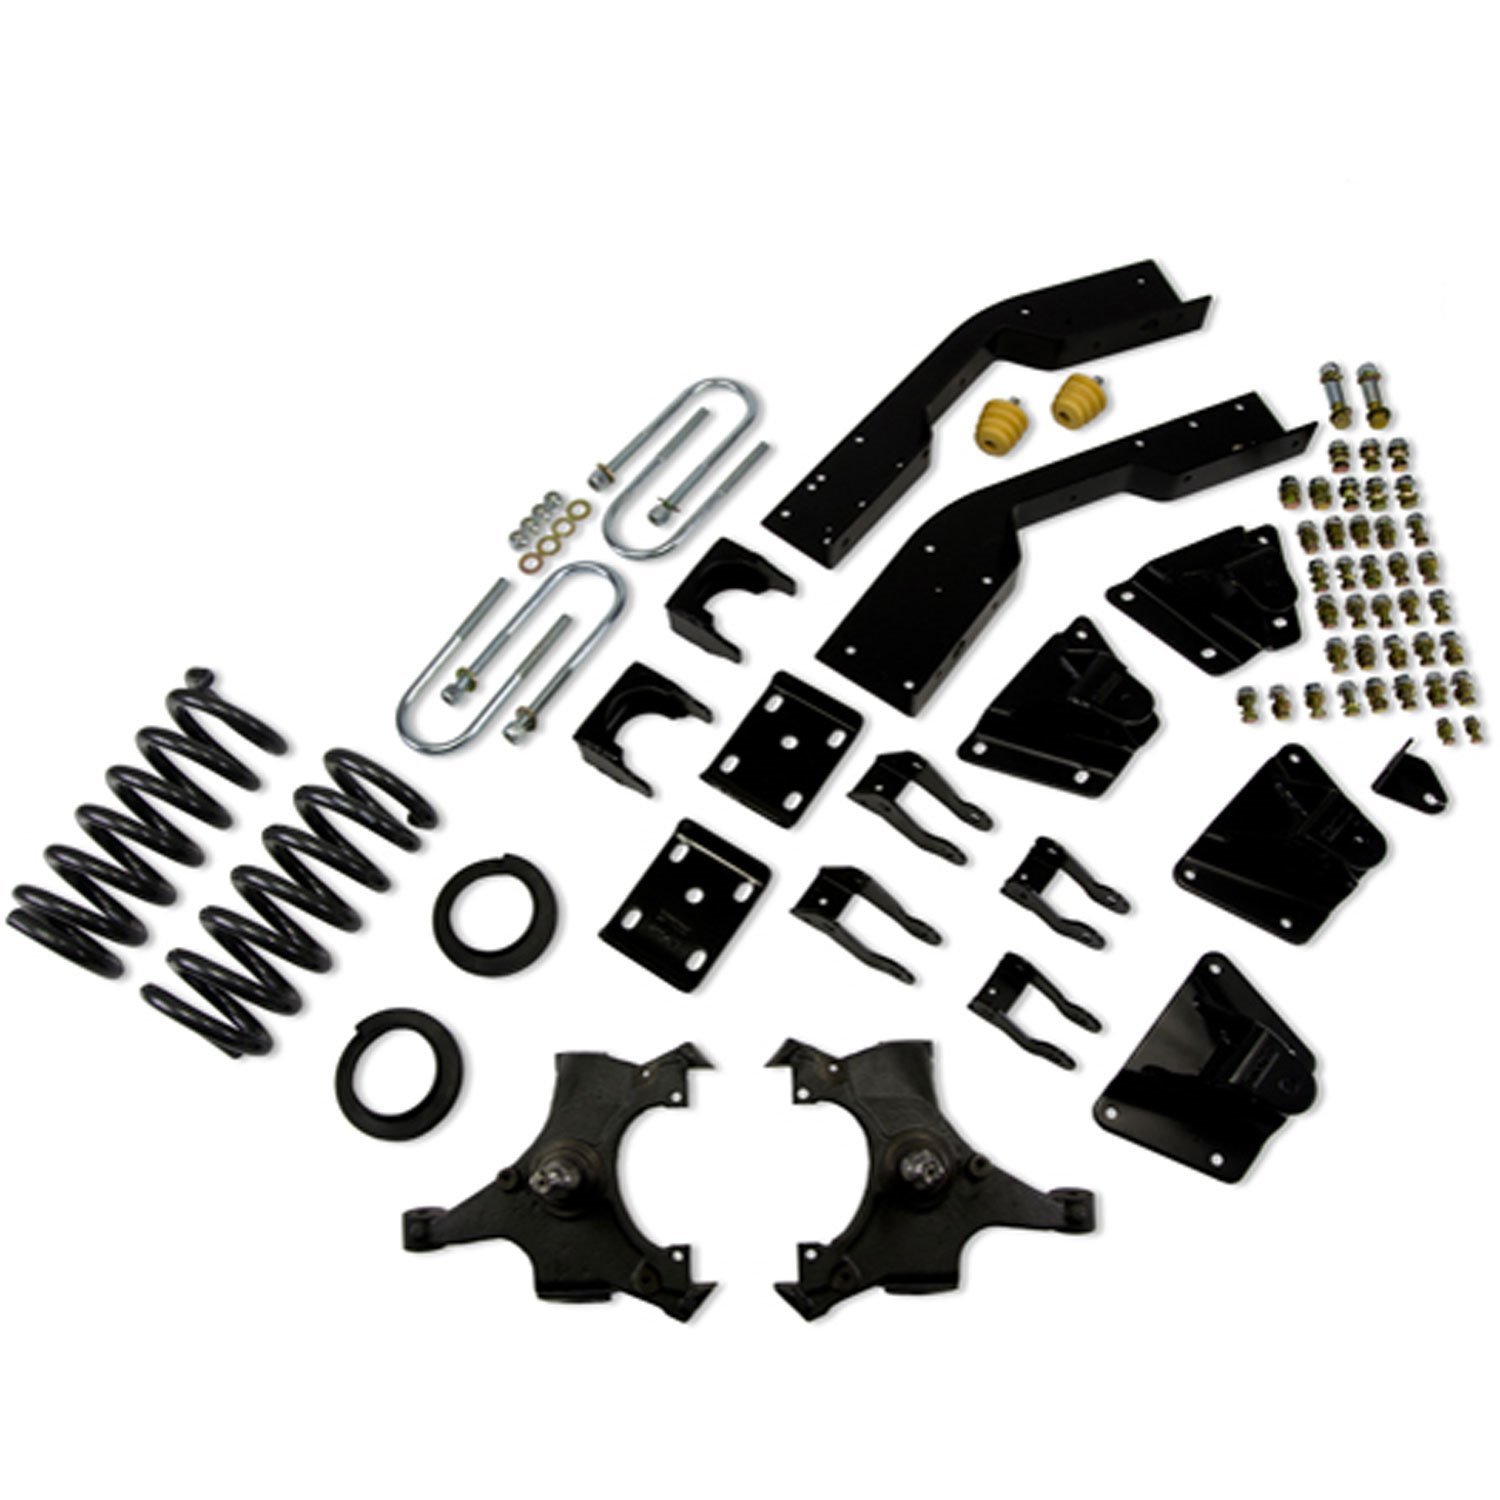 Complete Lowering Kit for 1995-1999 Chevy Suburban 2500